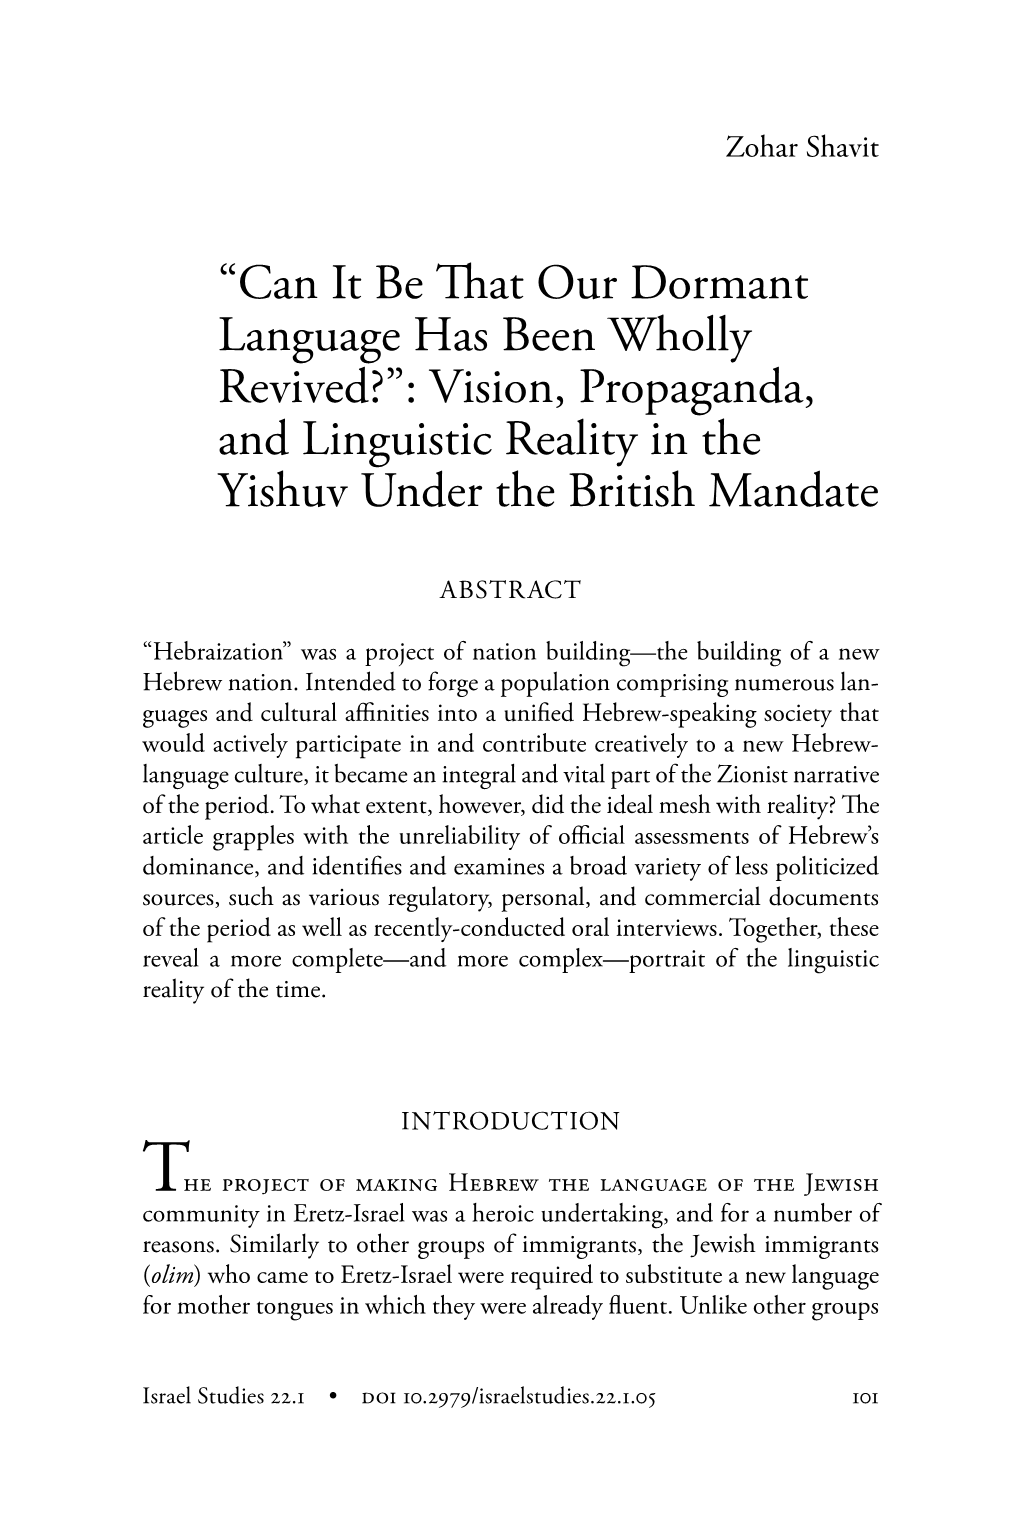 Can It Be That Our Dormant Language Has Been Wholly Revived?”: Vision, Propaganda, and Linguistic Reality in the Yishuv Under the British Mandate